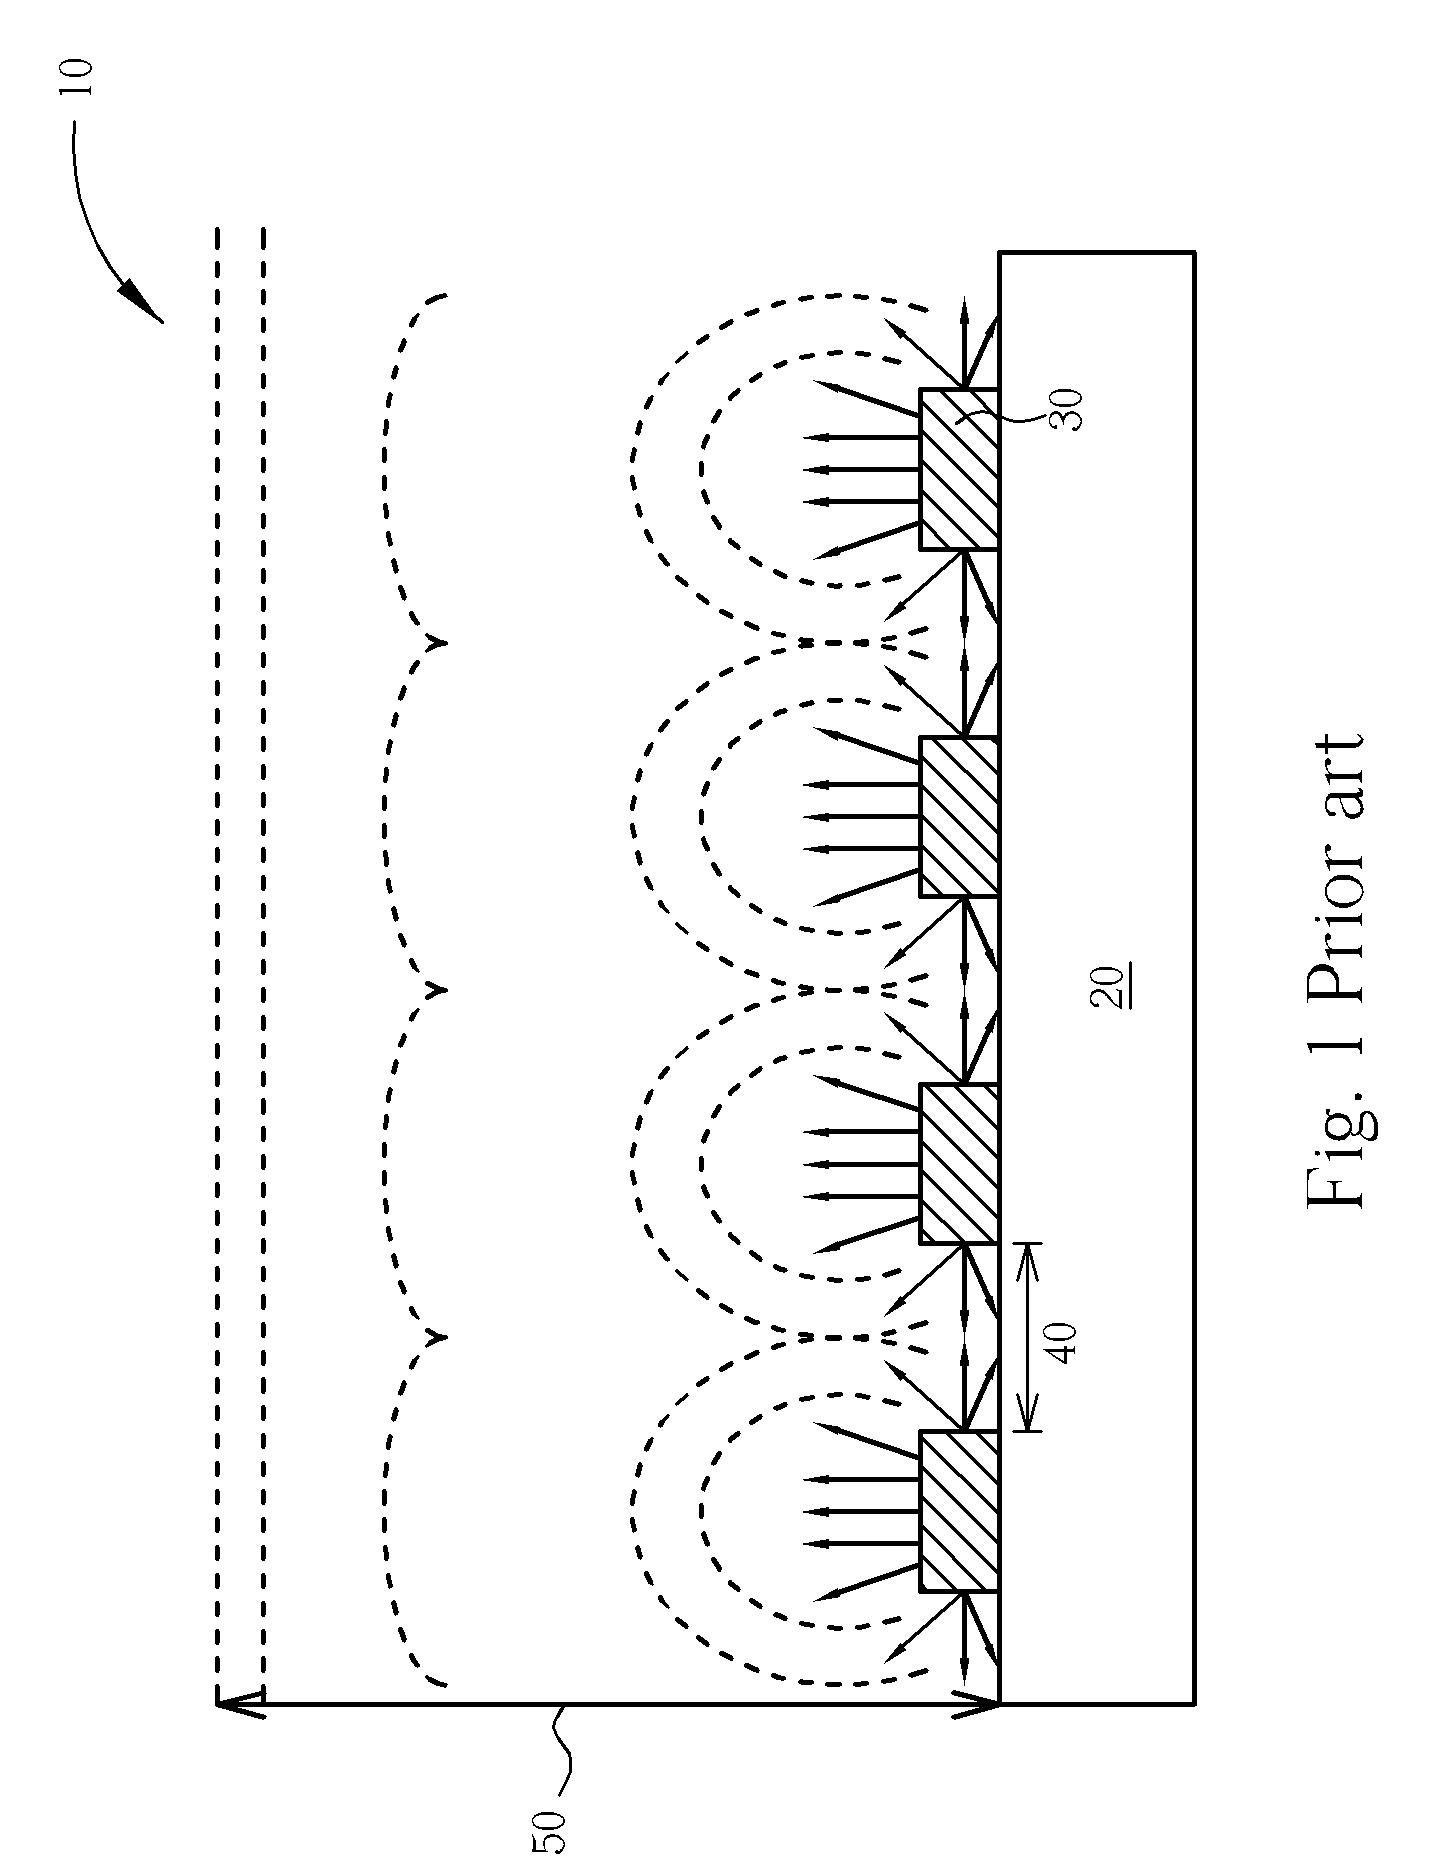 LED array package structure having silicon substrate and method of making the same